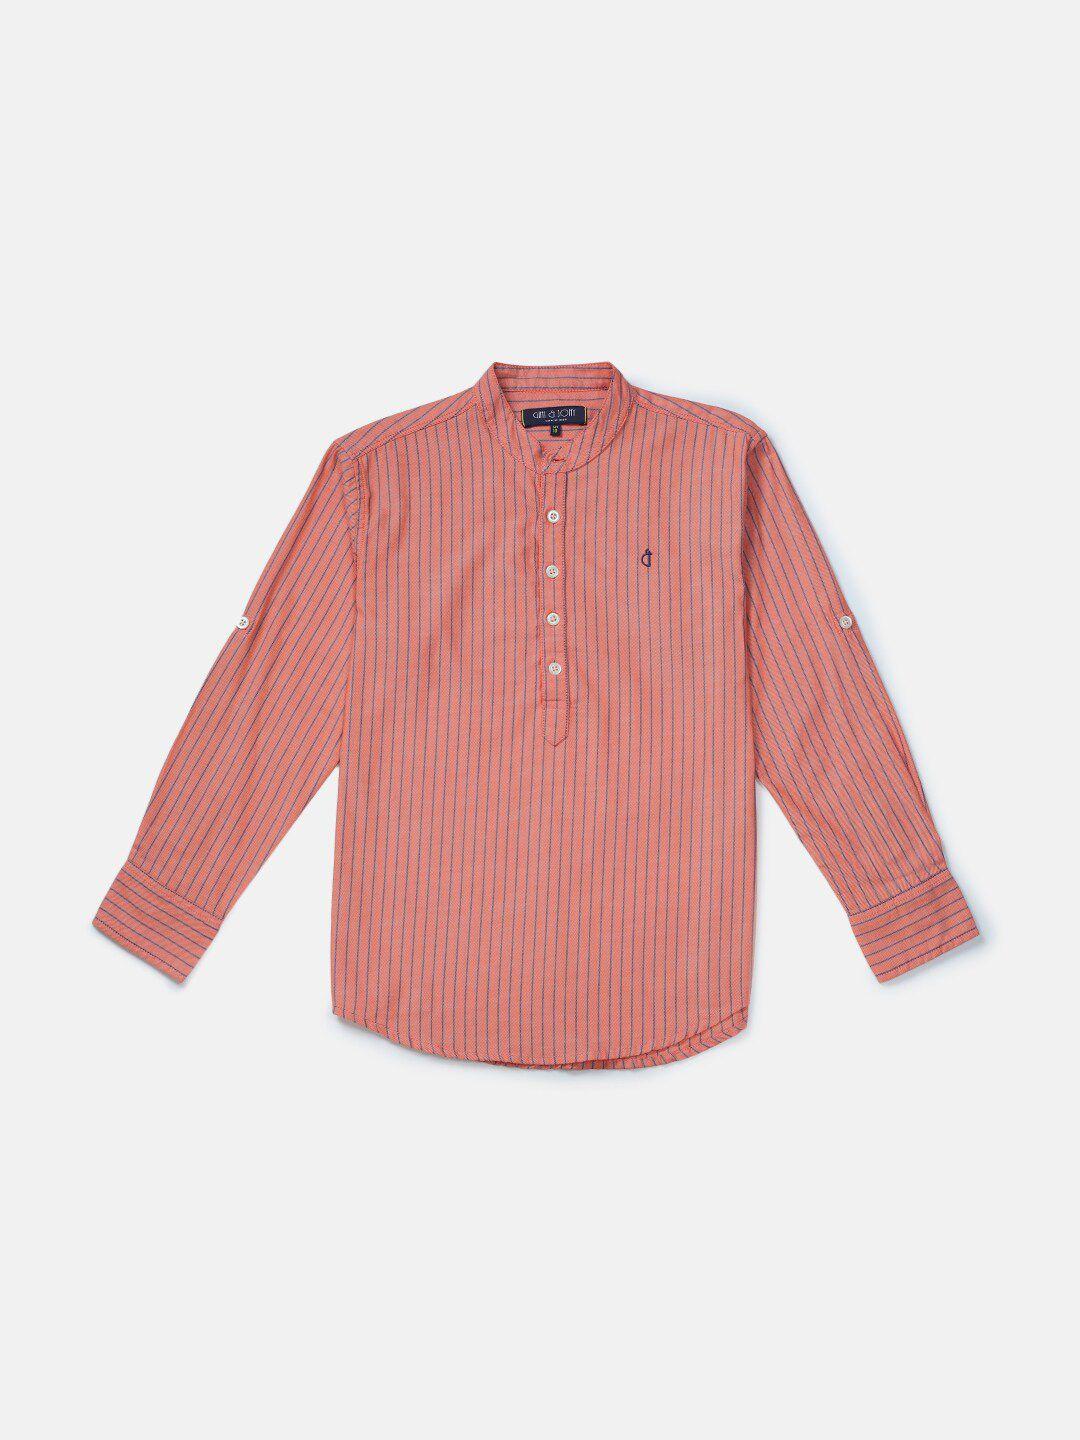 gini-and-jony-boys-vertical-striped-cotton-casual-shirt